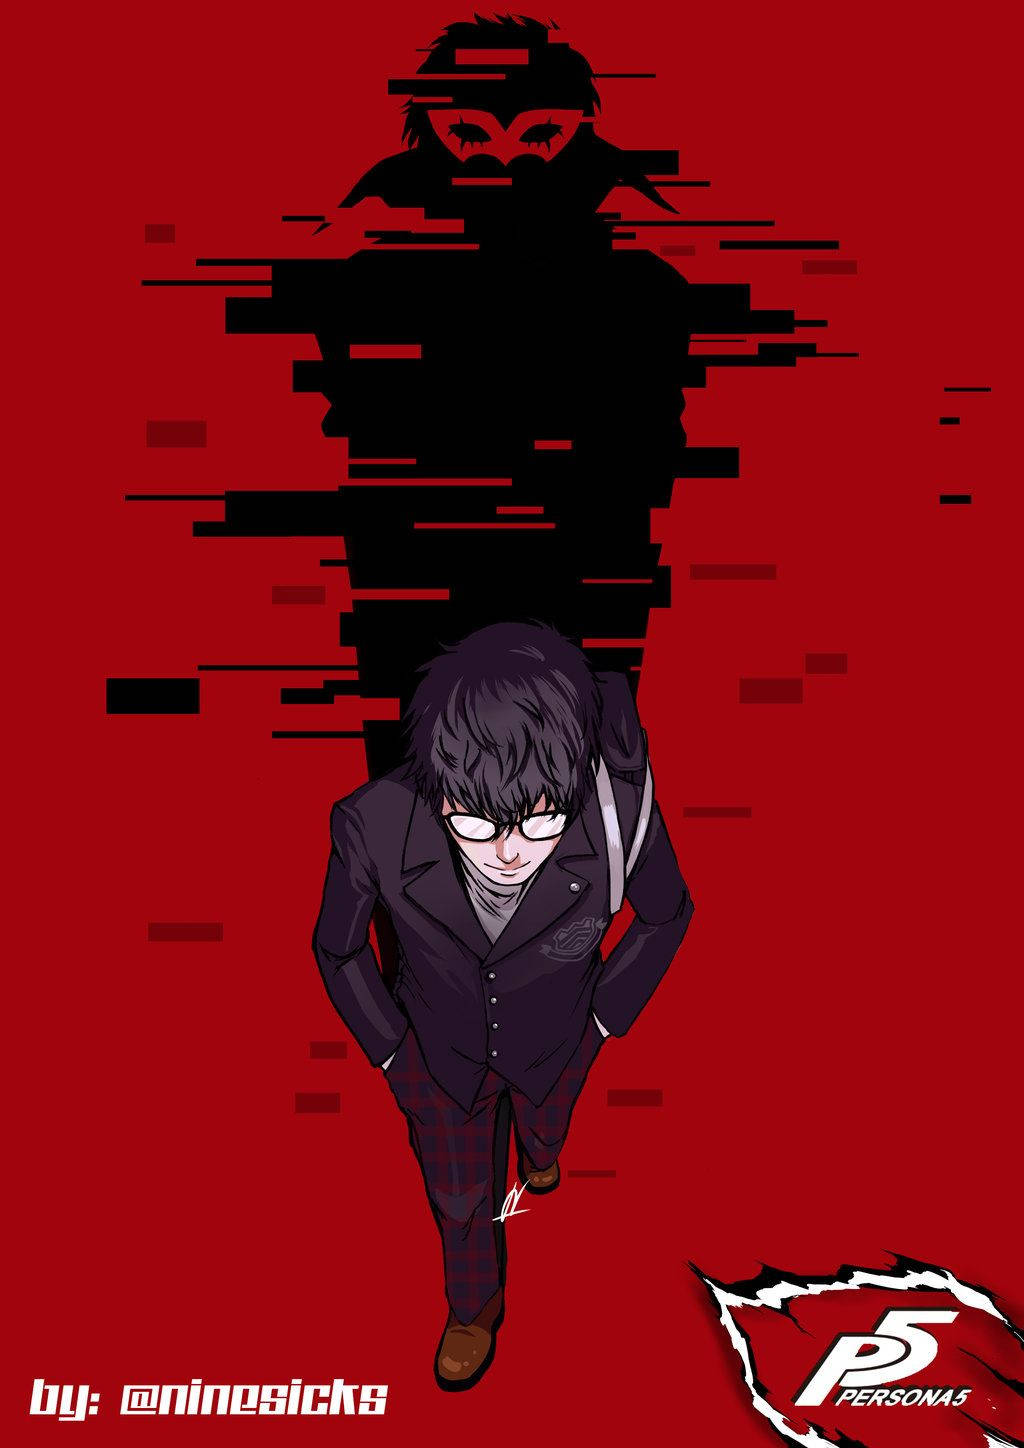 Follow the Phantom Thieves with Akira in "Persona 5" Wallpaper